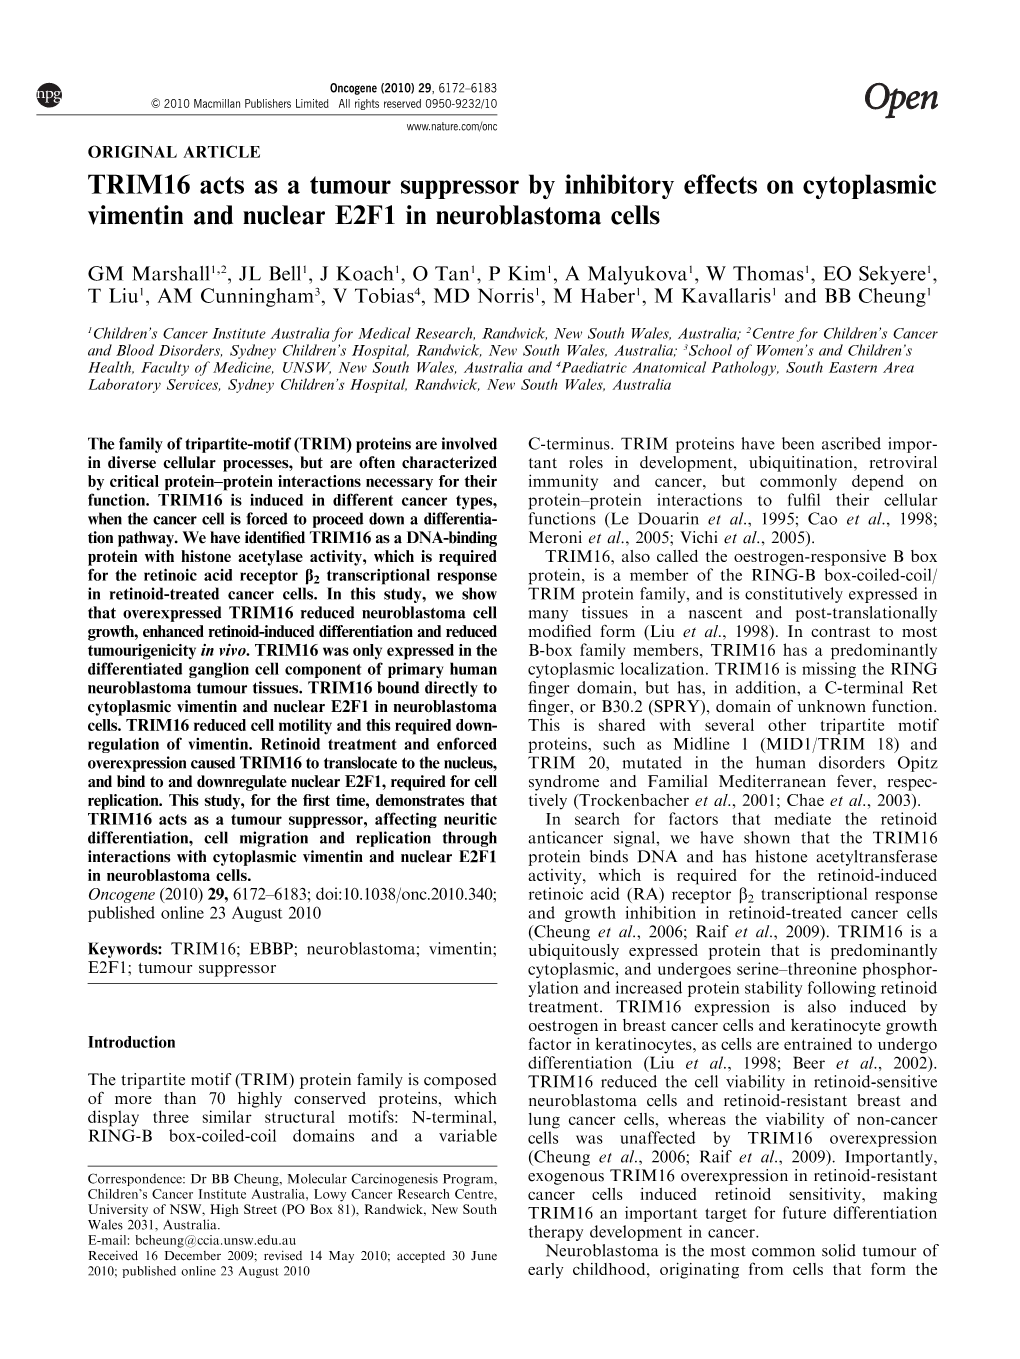 TRIM16 Acts As a Tumour Suppressor by Inhibitory Effects on Cytoplasmic Vimentin and Nuclear E2F1 in Neuroblastoma Cells